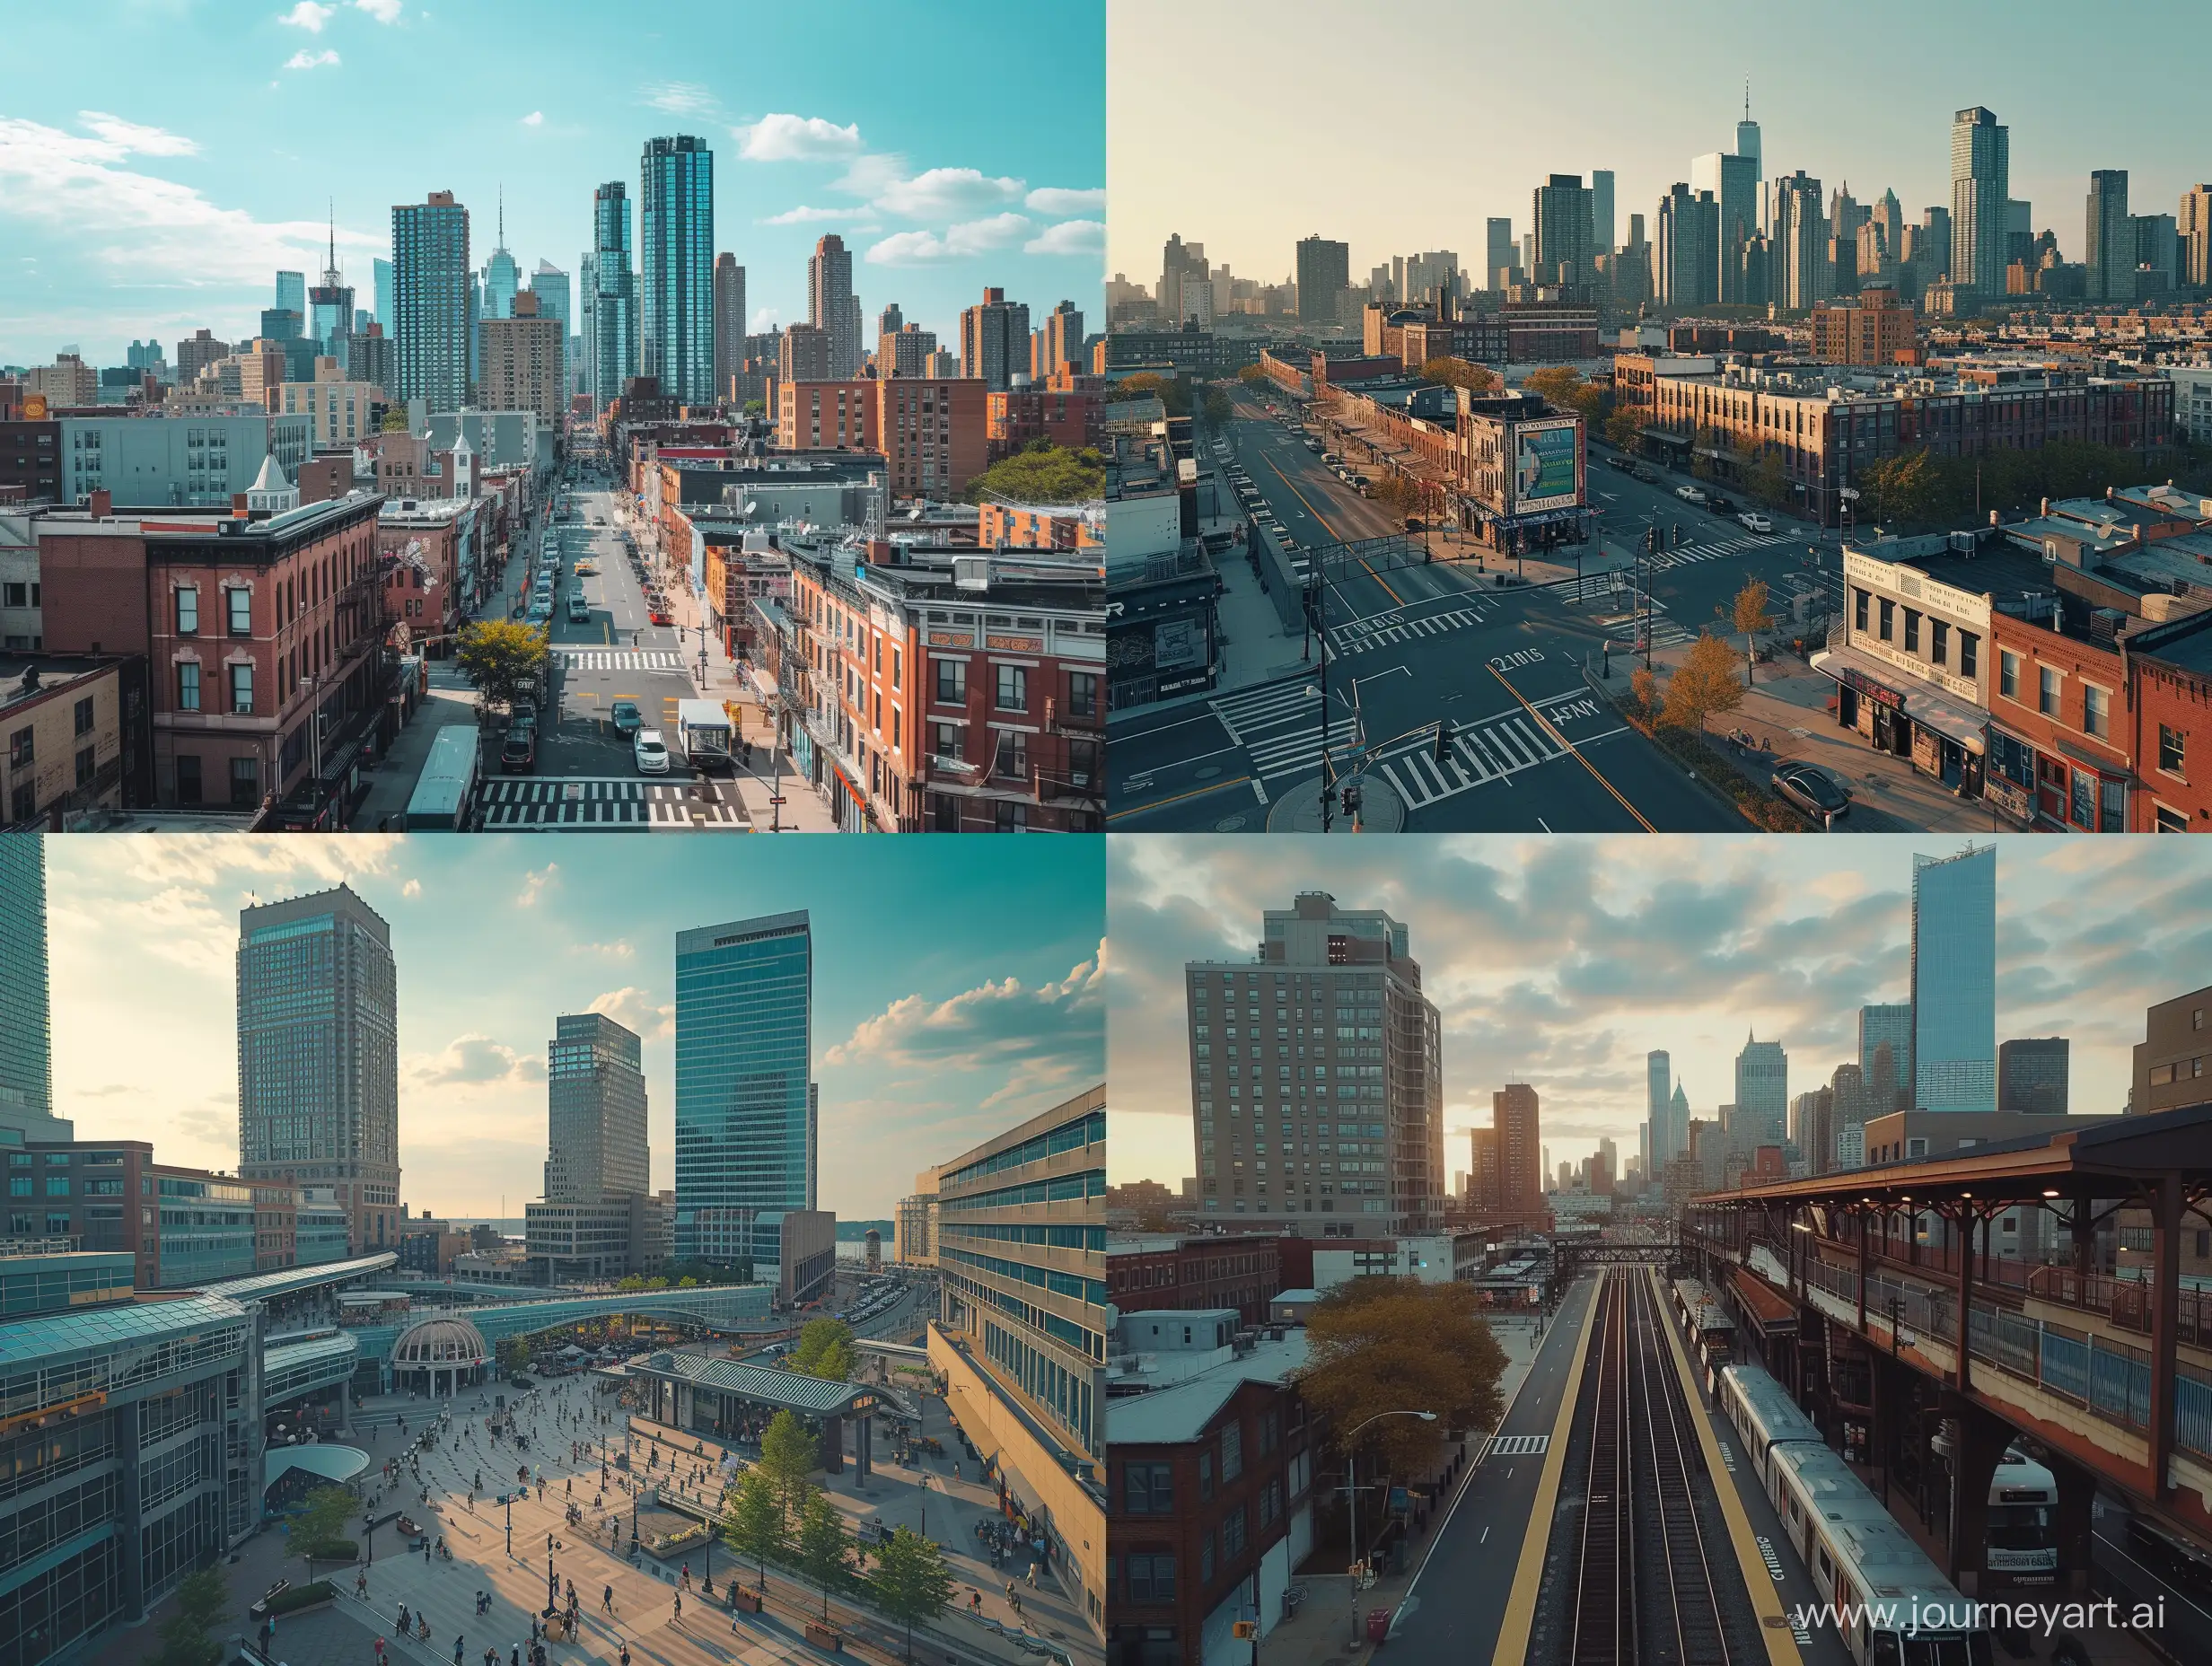 a bustling new jersey city, the photo is bathed in natural lighting, day time setting. Shot in 4k with a high end DSLR camera. such as a Canon EOS R5 with a 50mm f/1. 2 lens, architecture, drone view, skyline, vivid
